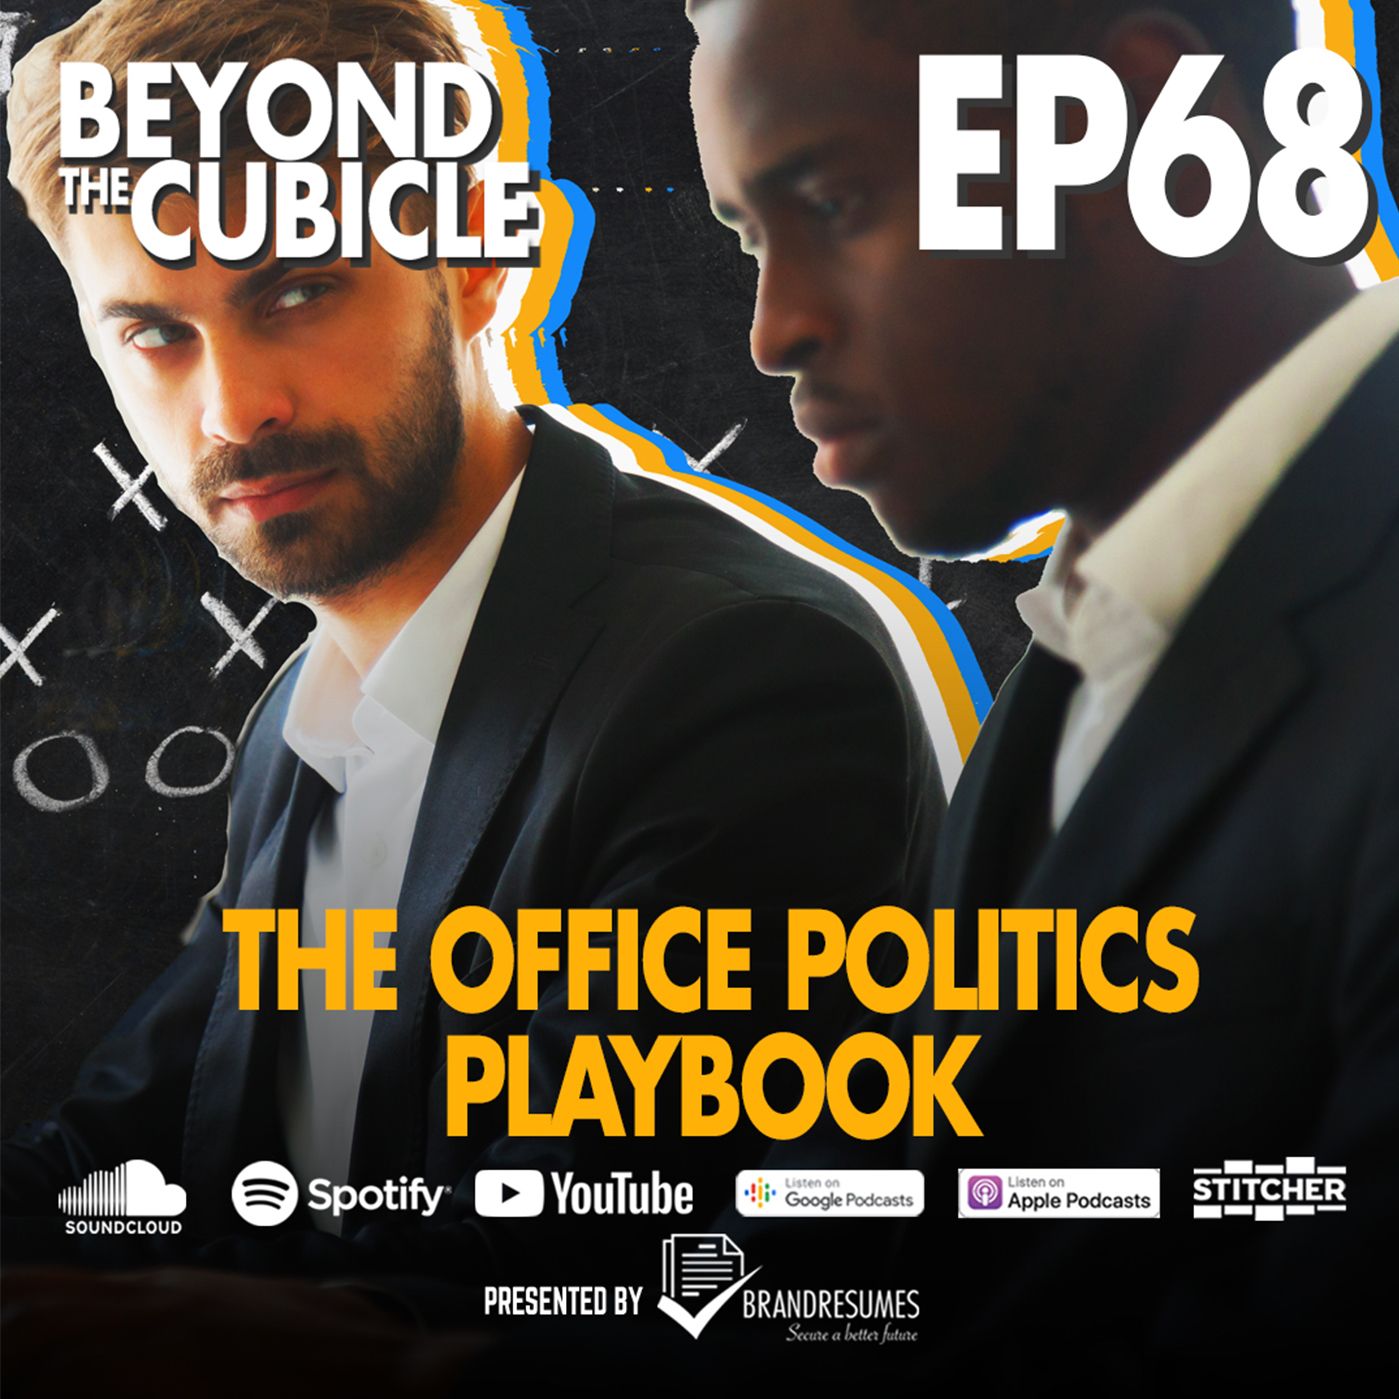 EP 68 | The Office Politics Playbook